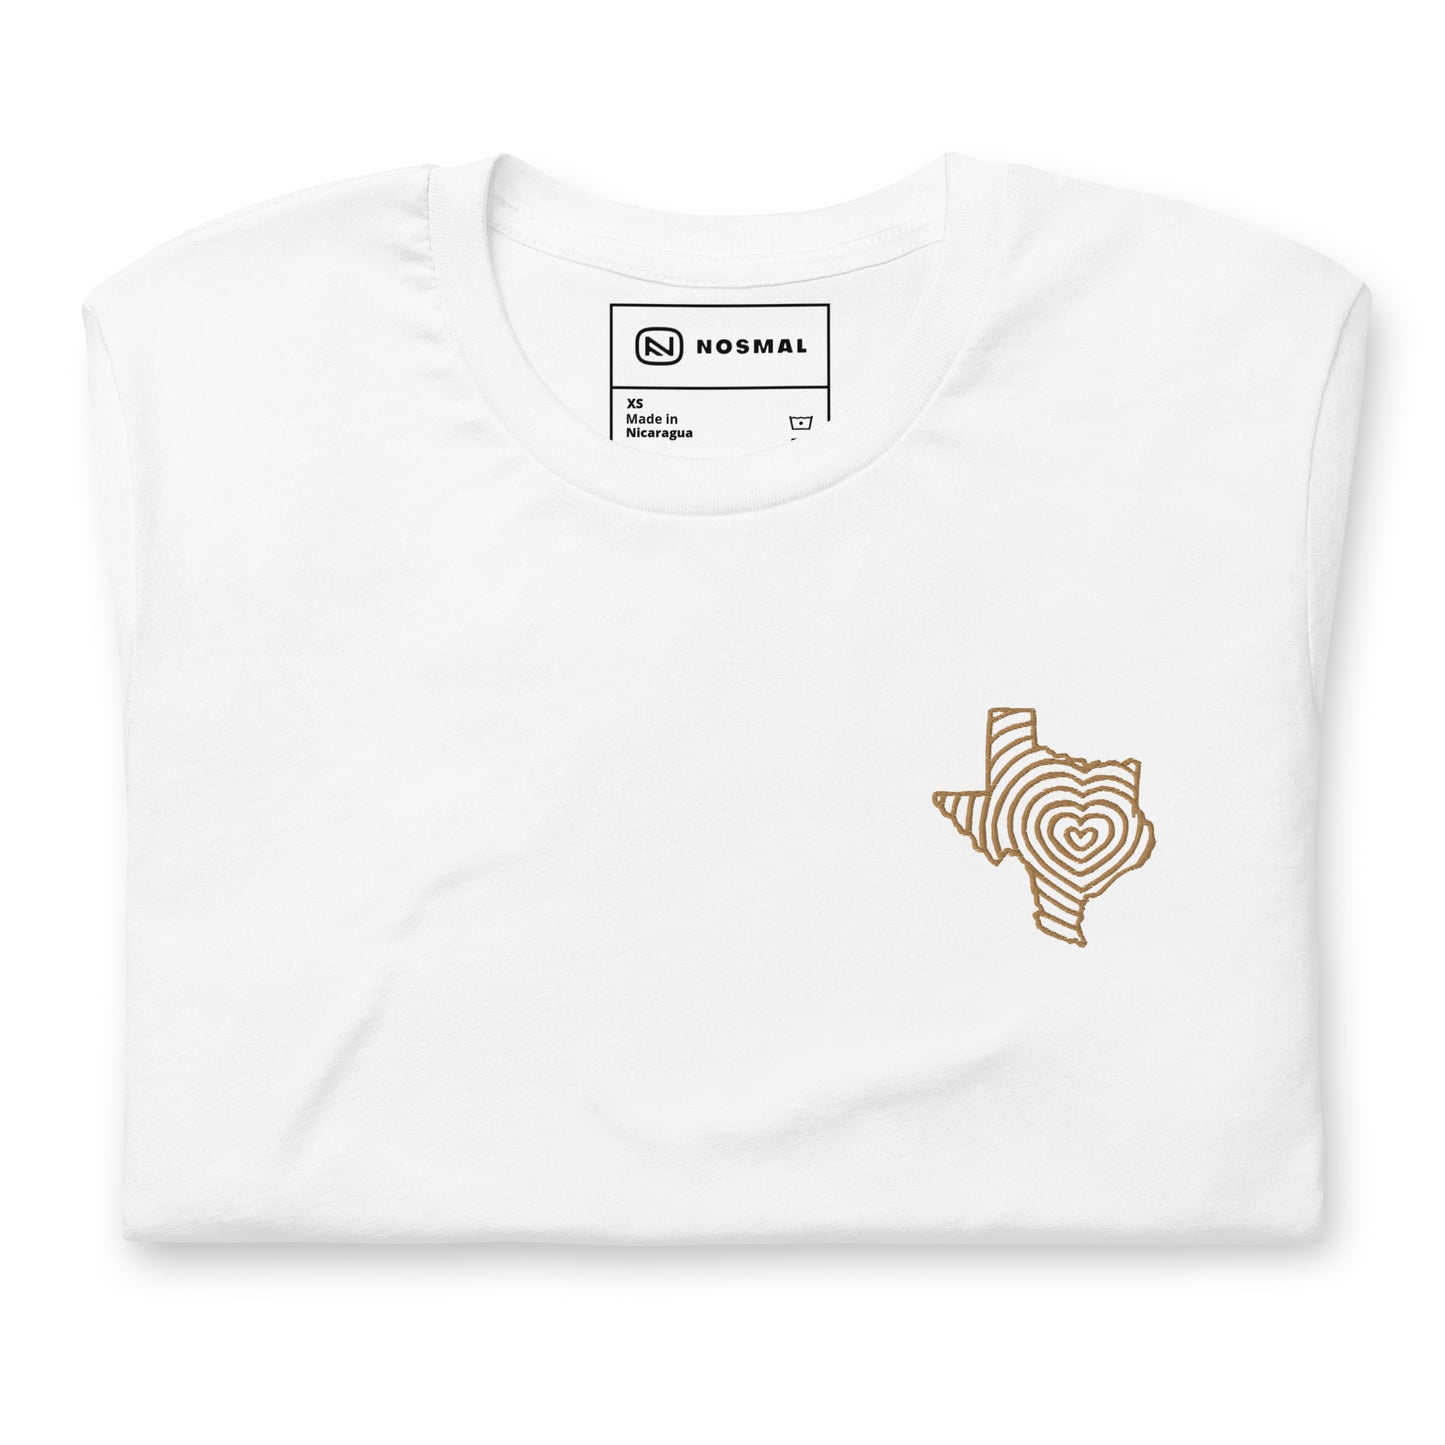 Top down view of heartbeat of texas gold embroidered design on white unisex t-shirt.